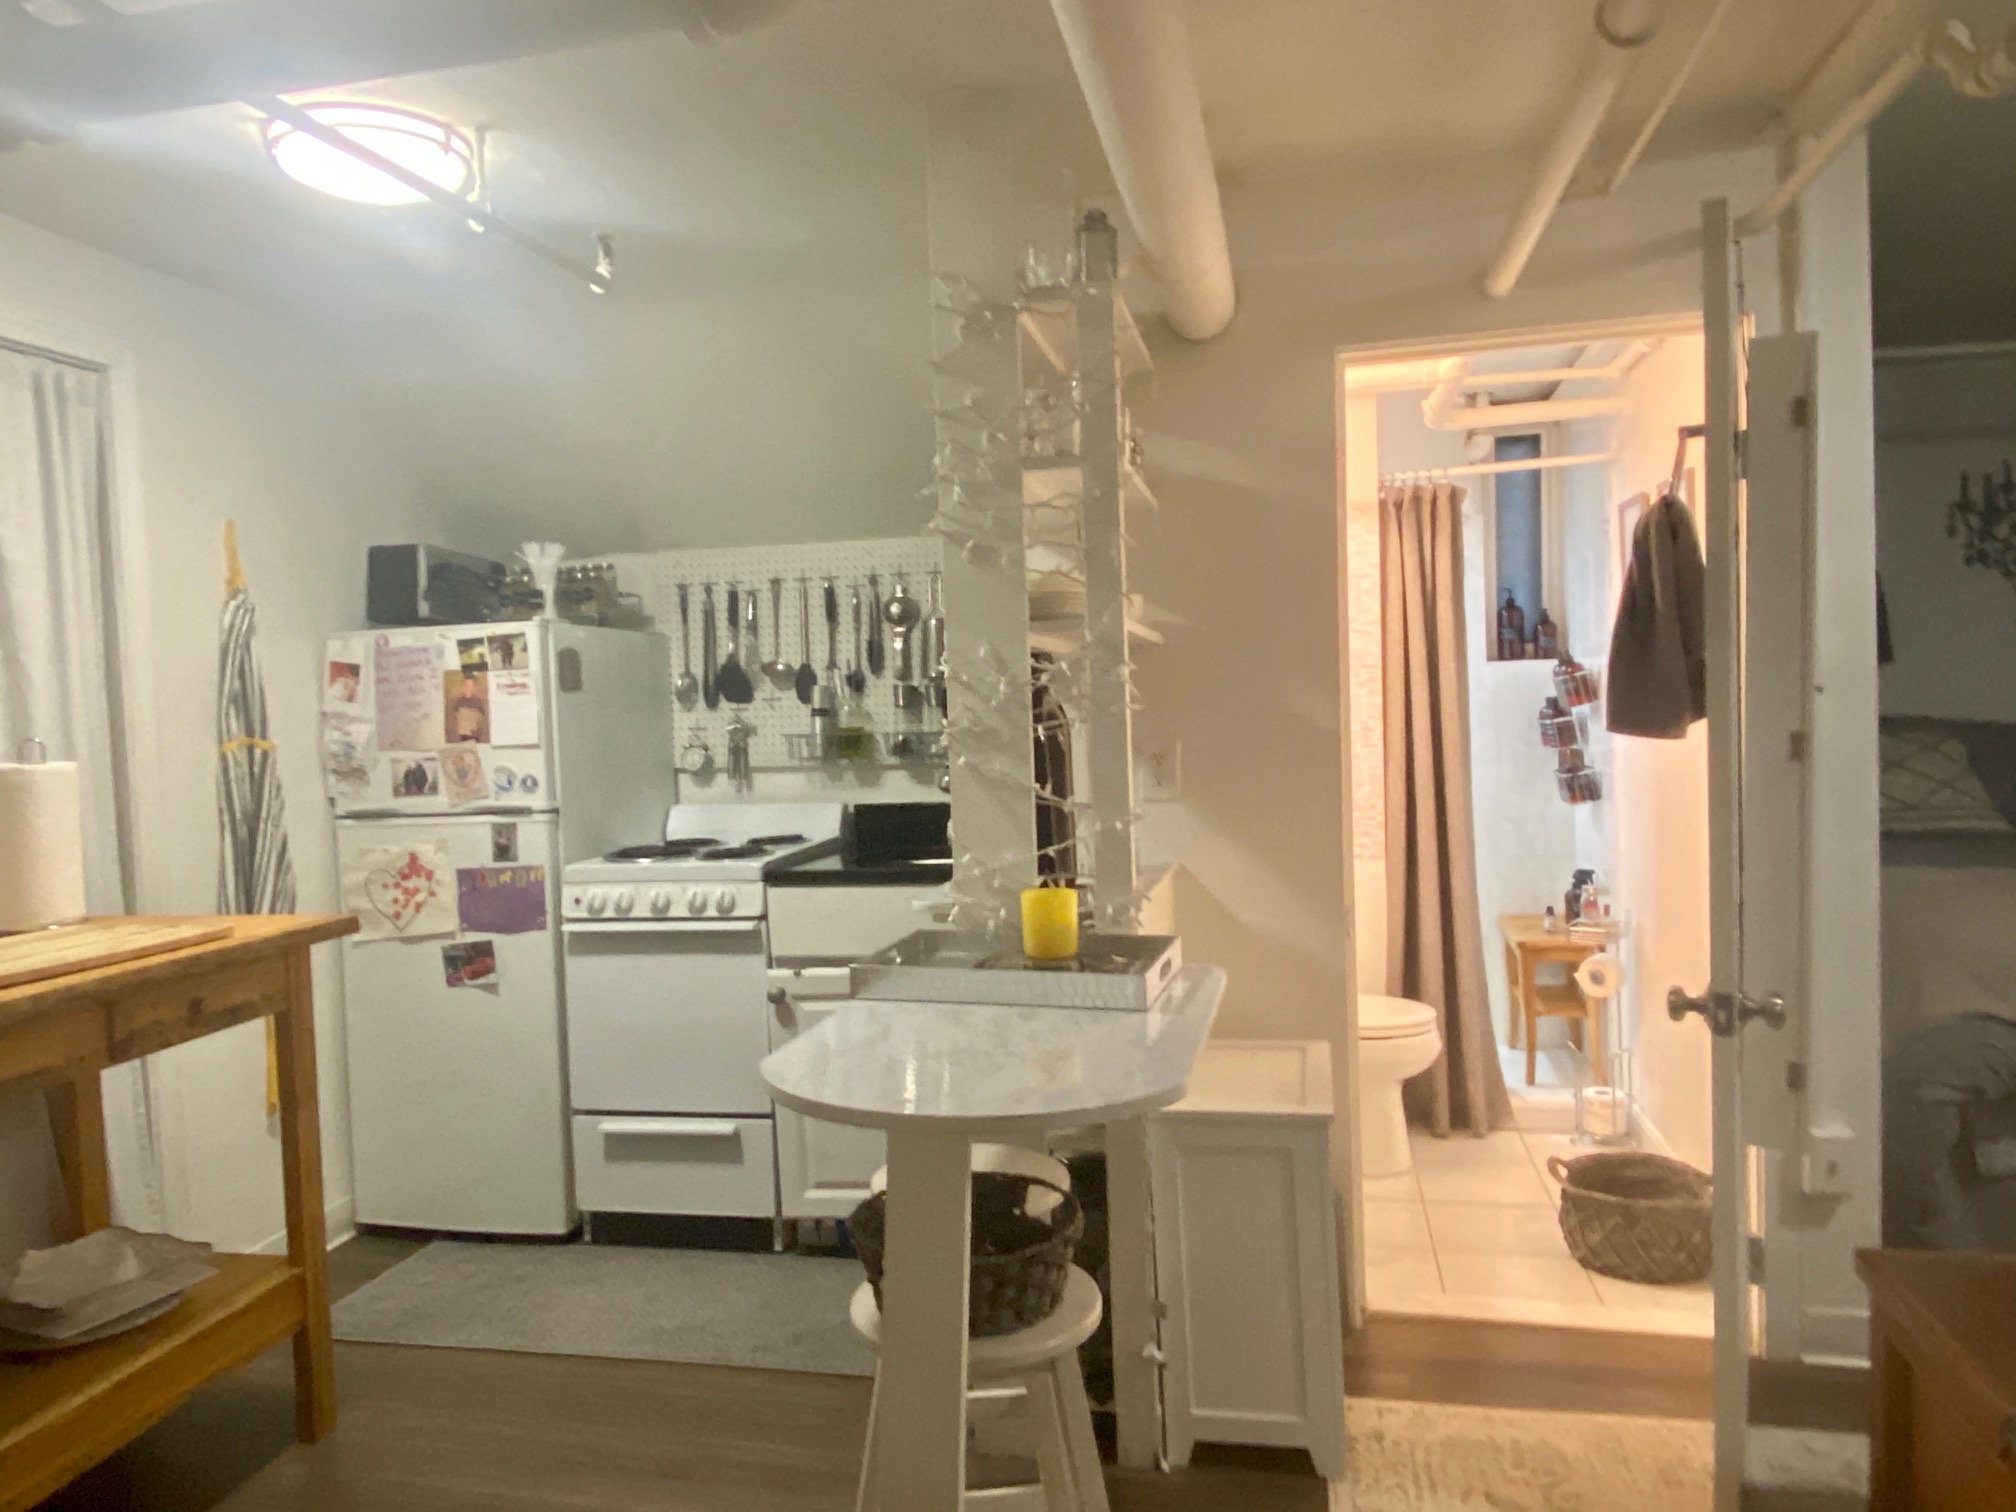 Photos of apartment on Charles St.,Boston MA 02114